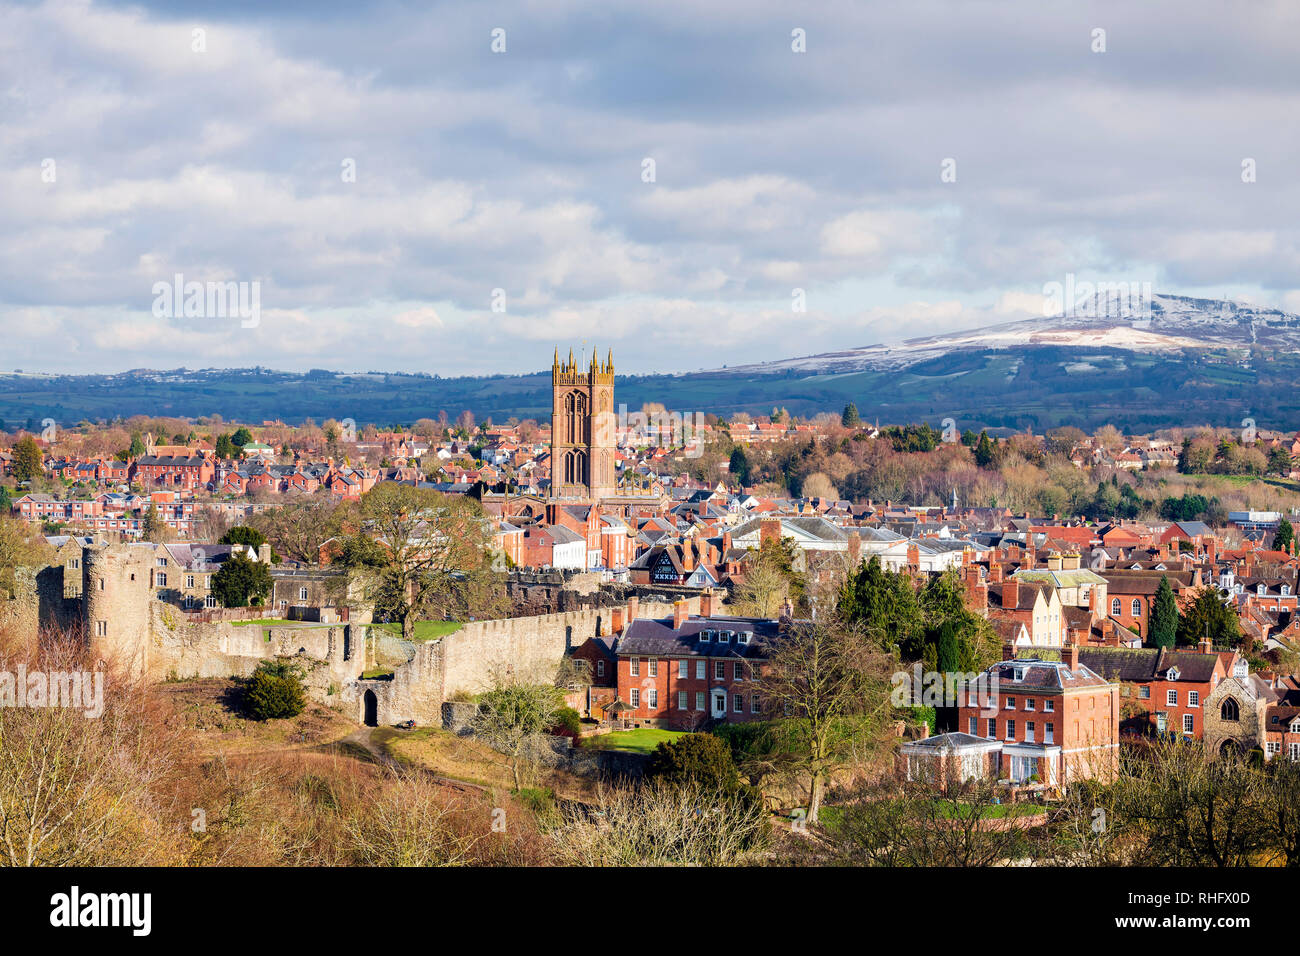 Ludlow Castle in winter, with a dusting of snow on the distant hills. Photo taken from Whitcliffe Common, overlooking the town, UK. Stock Photo